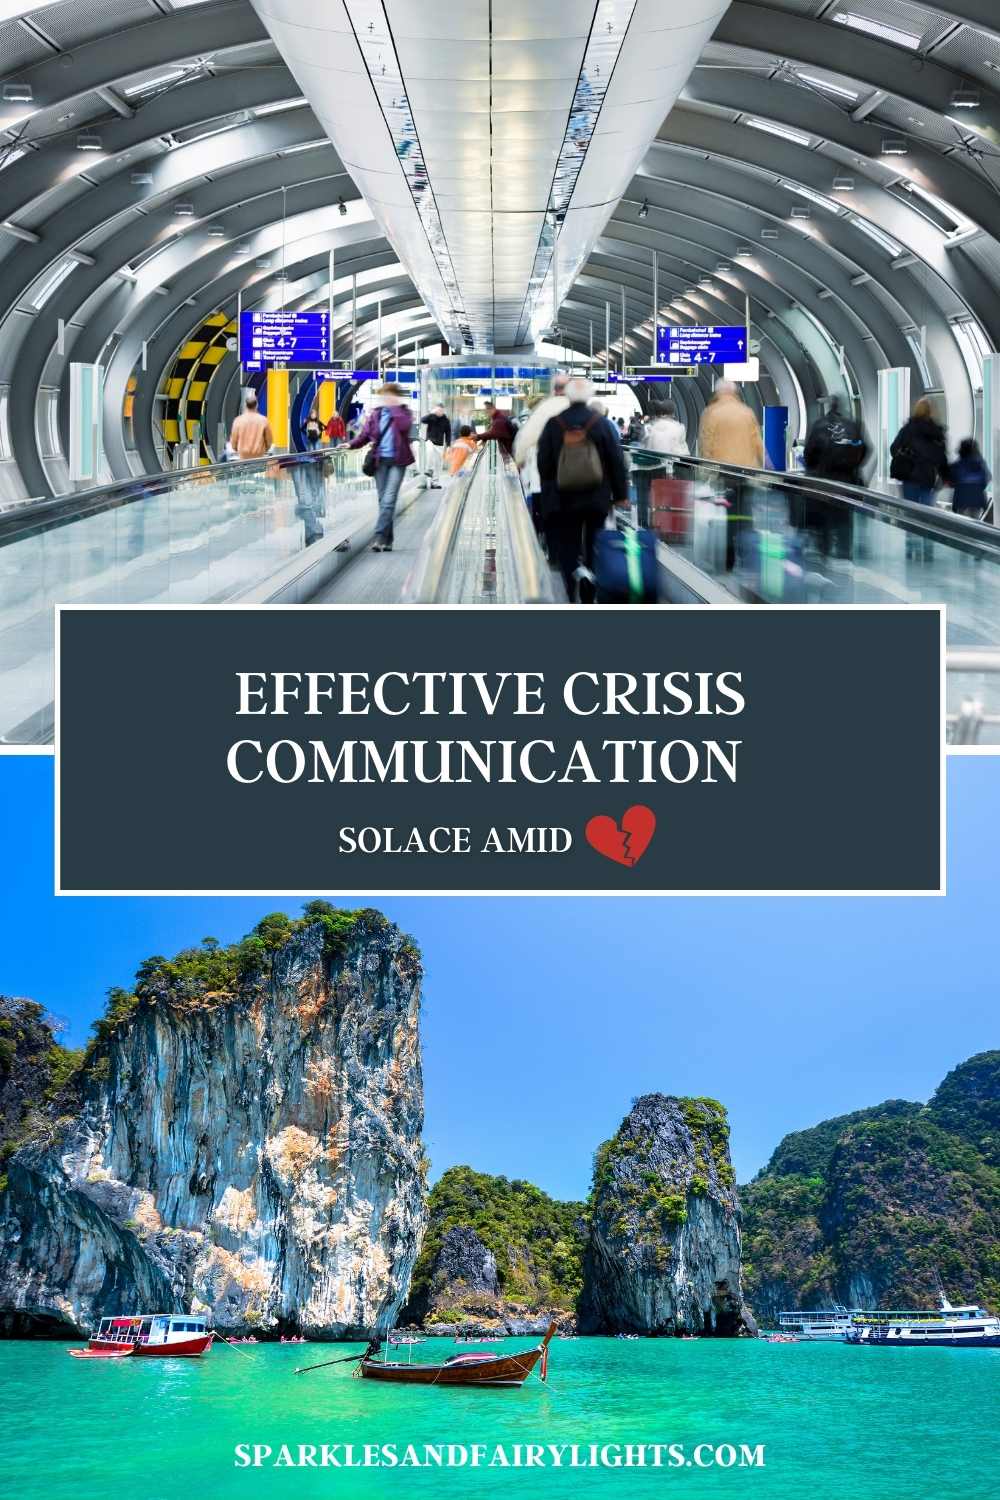 What makes for effective crisis communication